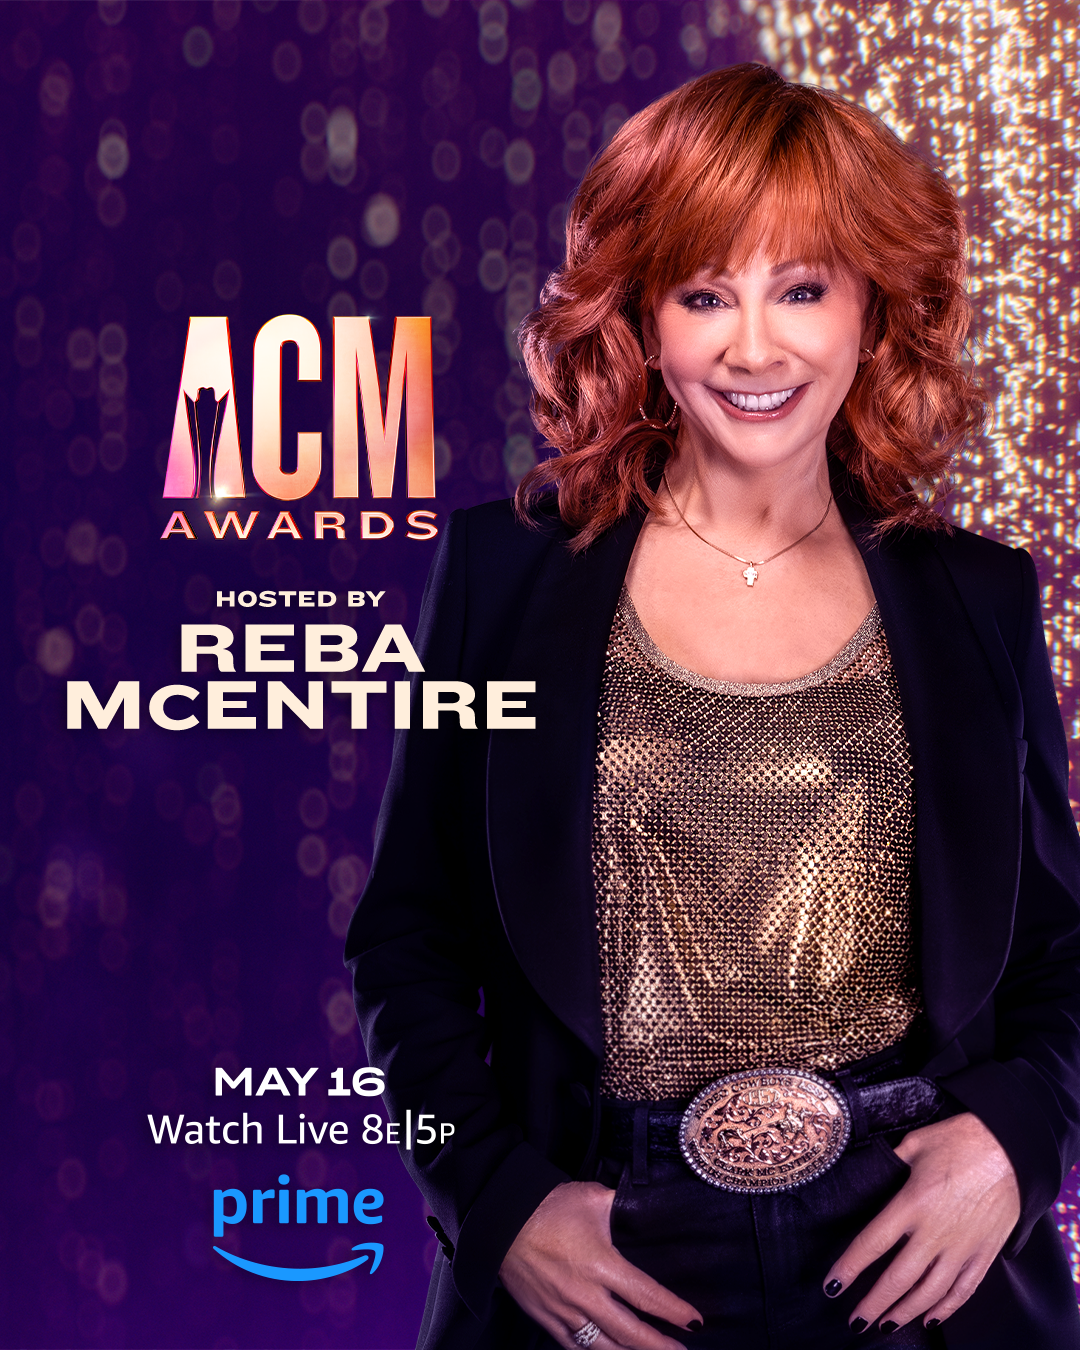 ENTERTAINMENT ICON REBA MCENTIRE TO HOST THE 59TH ACADEMY OF COUNTRY MUSIC AWARDS